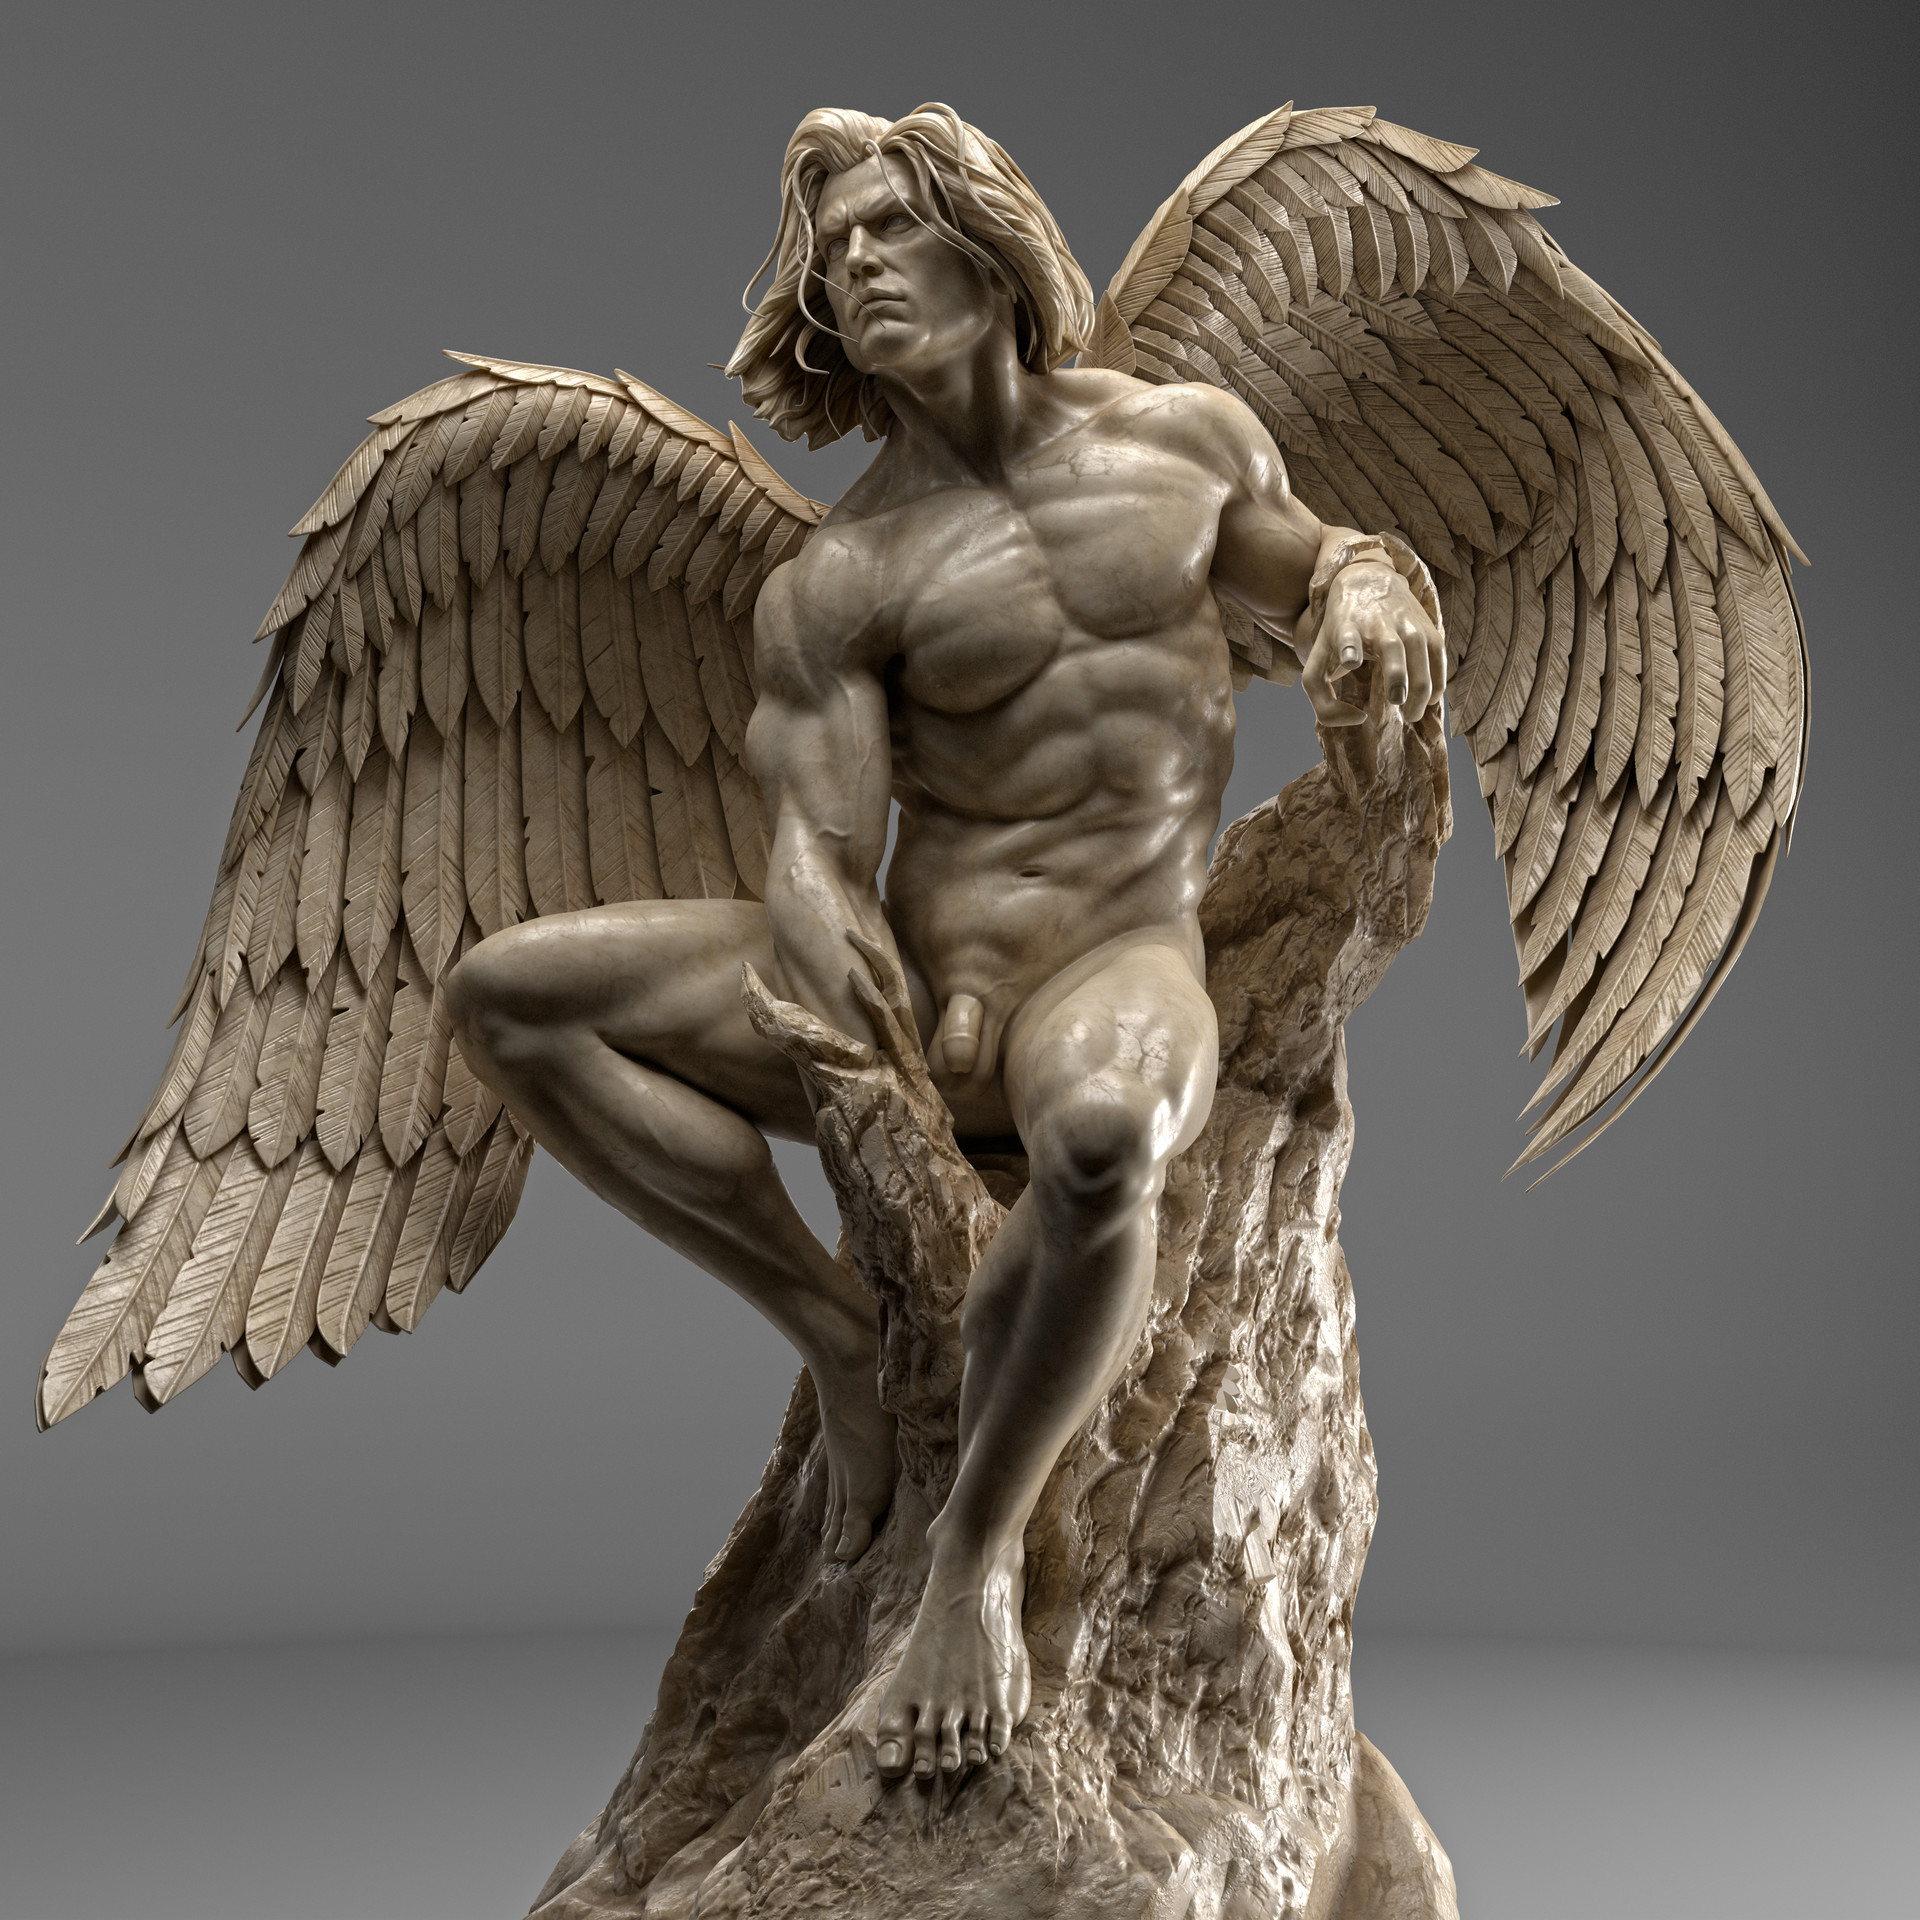 The sculpture depicts Lucifer, the Fallen Angel, being defeated by god and ...